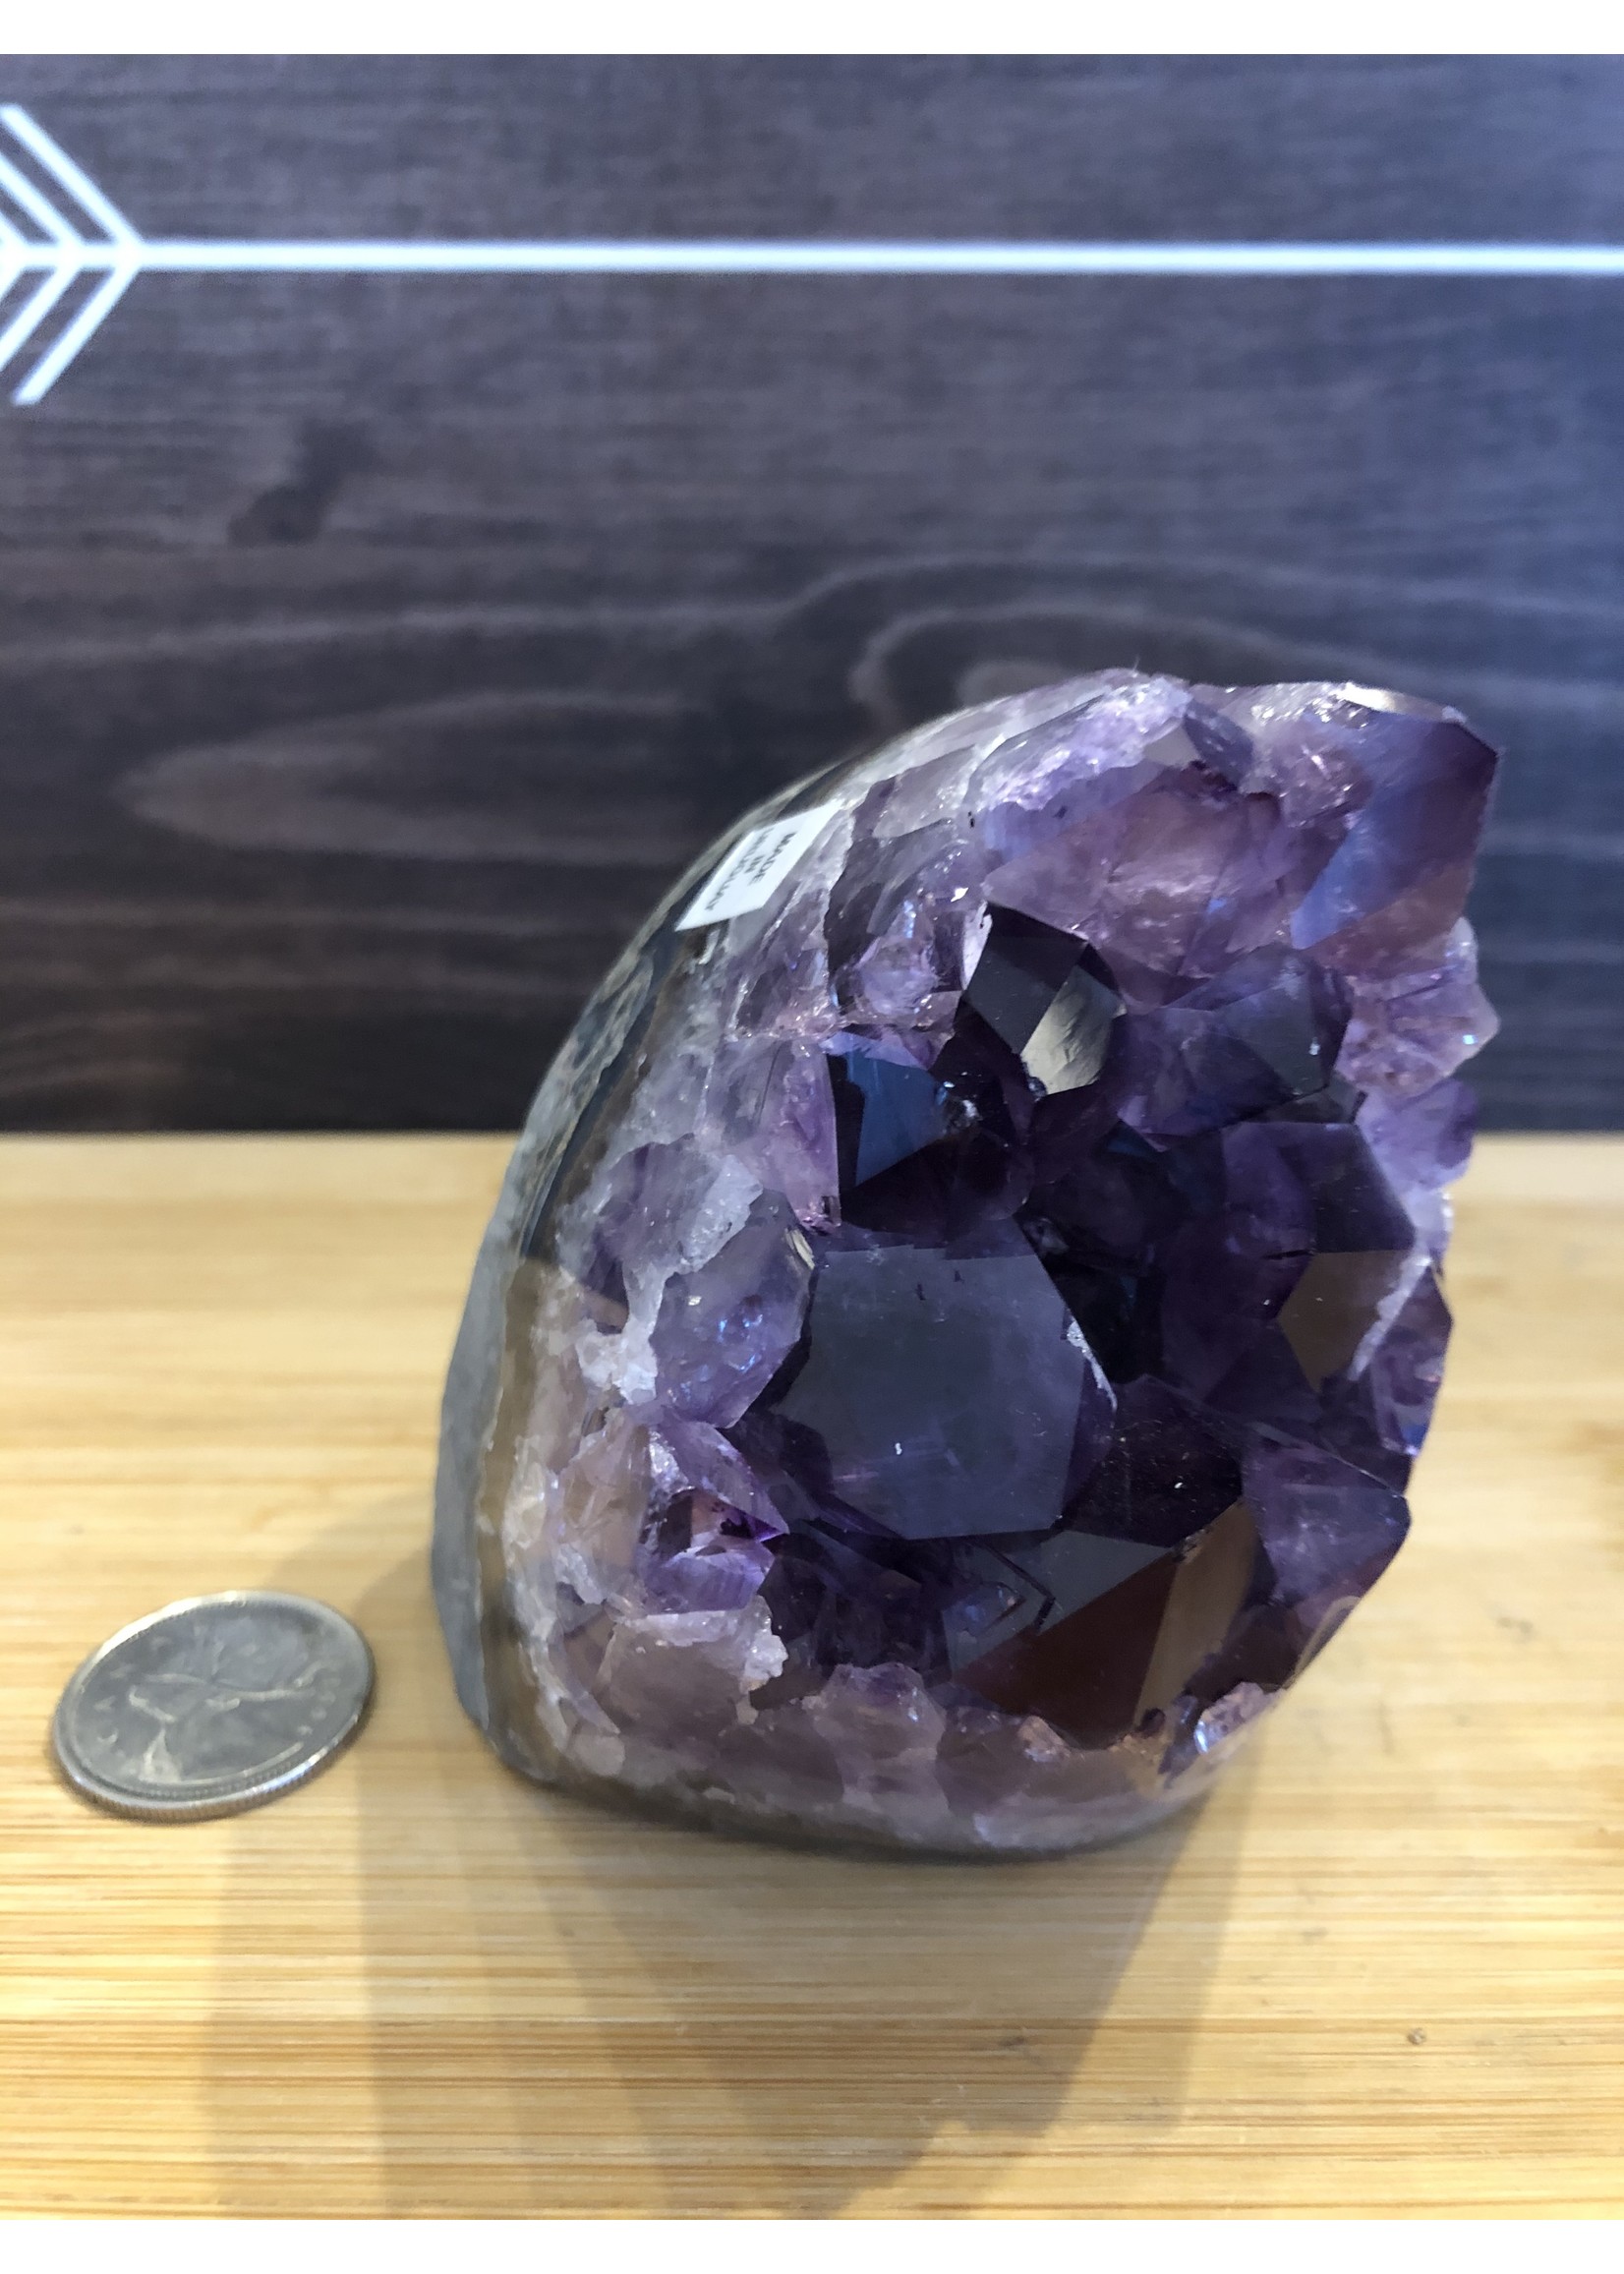 majestic amethyst free form, promotes spiritual upliftment, concentration and meditation